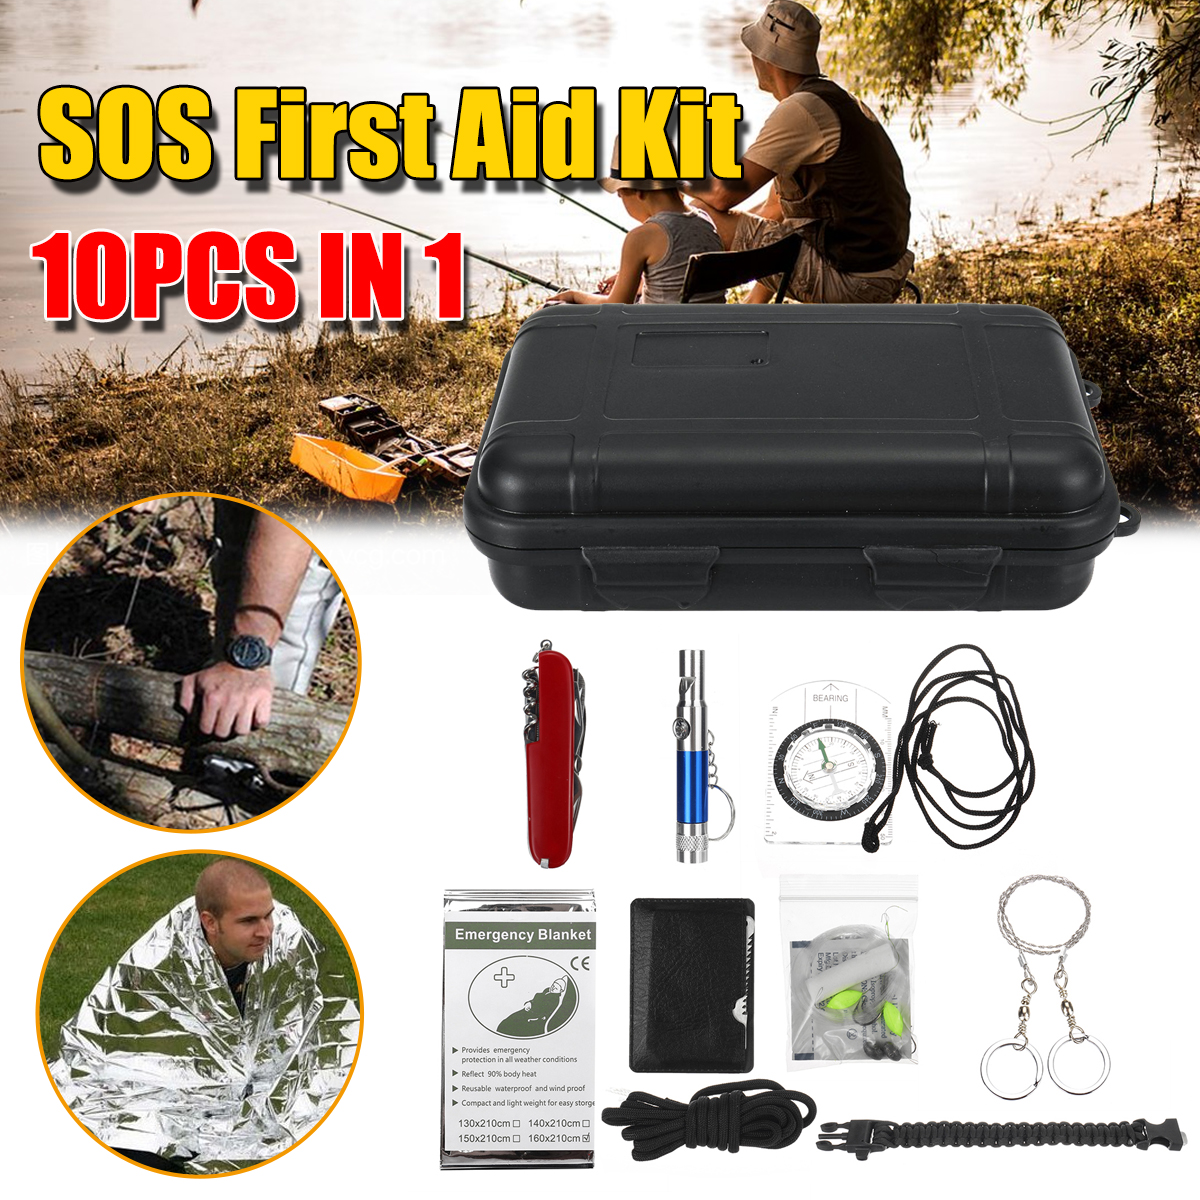 SOS-Emergency-Survival-Equipment-Tools-Kit-Outdoor-Tactical-Camping-Hiking-Gear-Tool-1424947-1